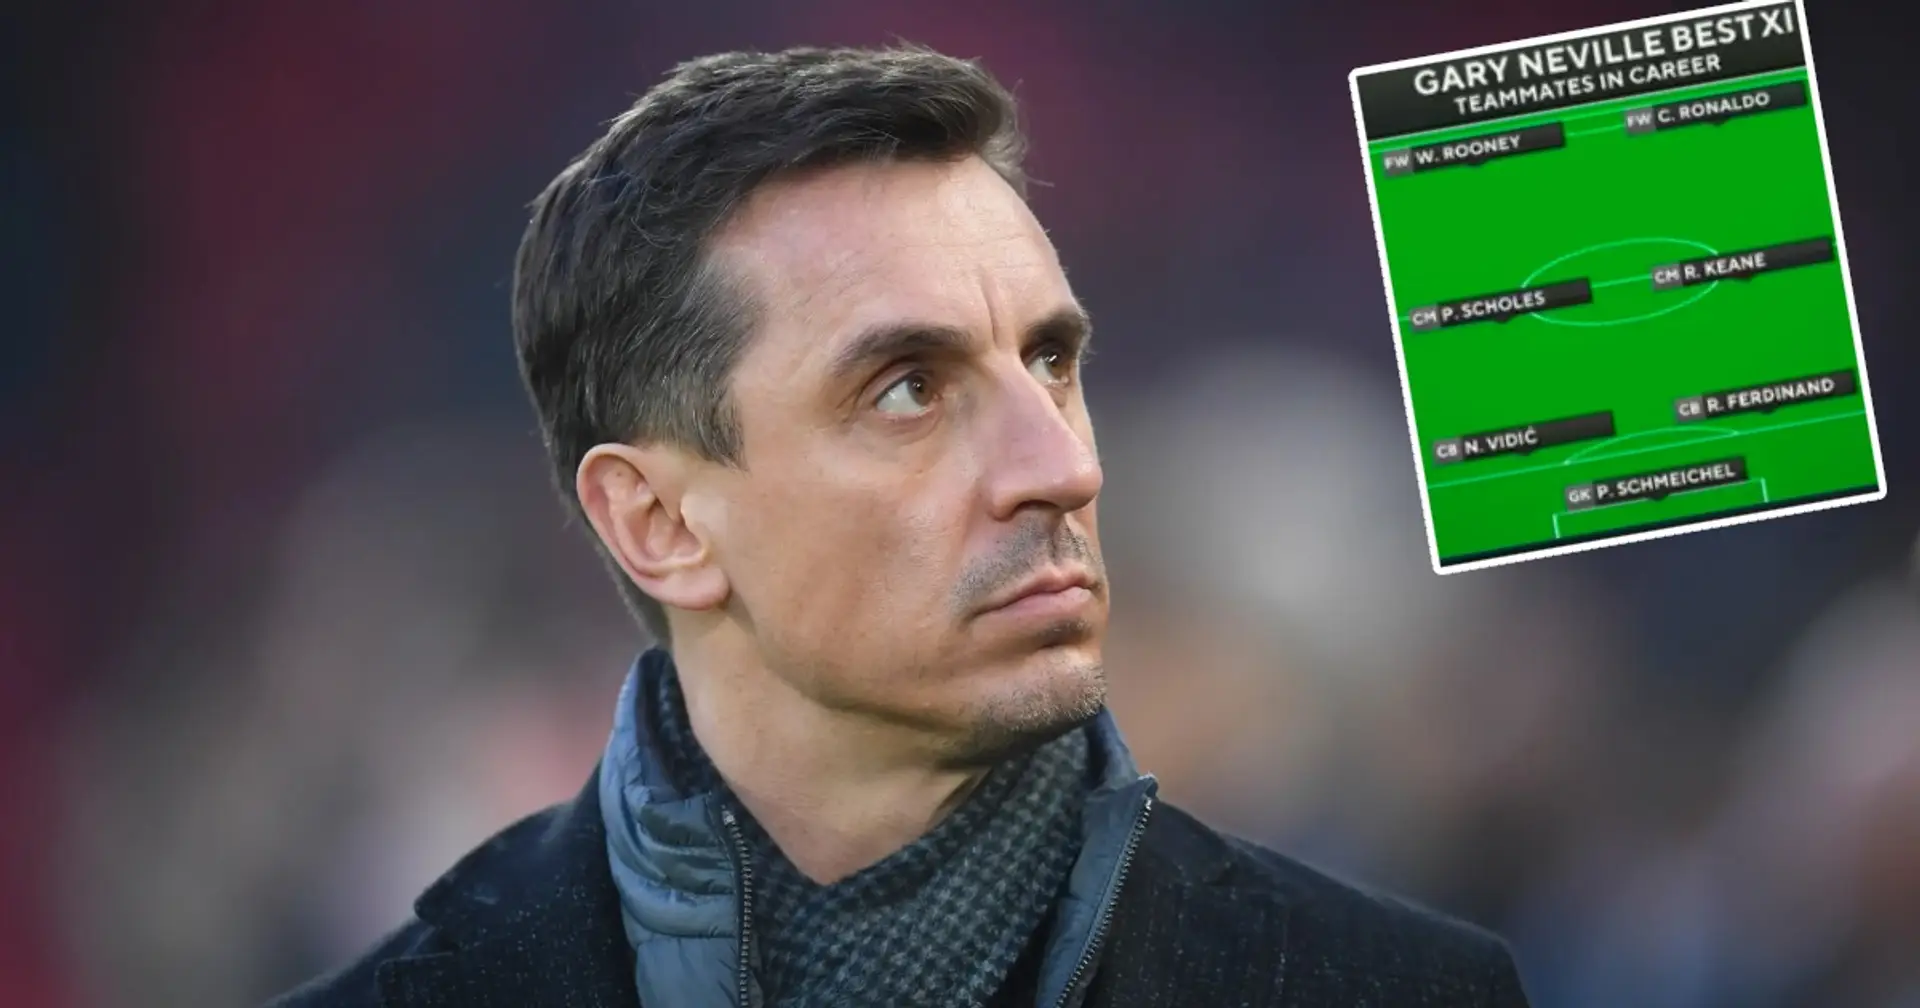 Gary Neville names his greatest Man United XI - ONE notable name missing 